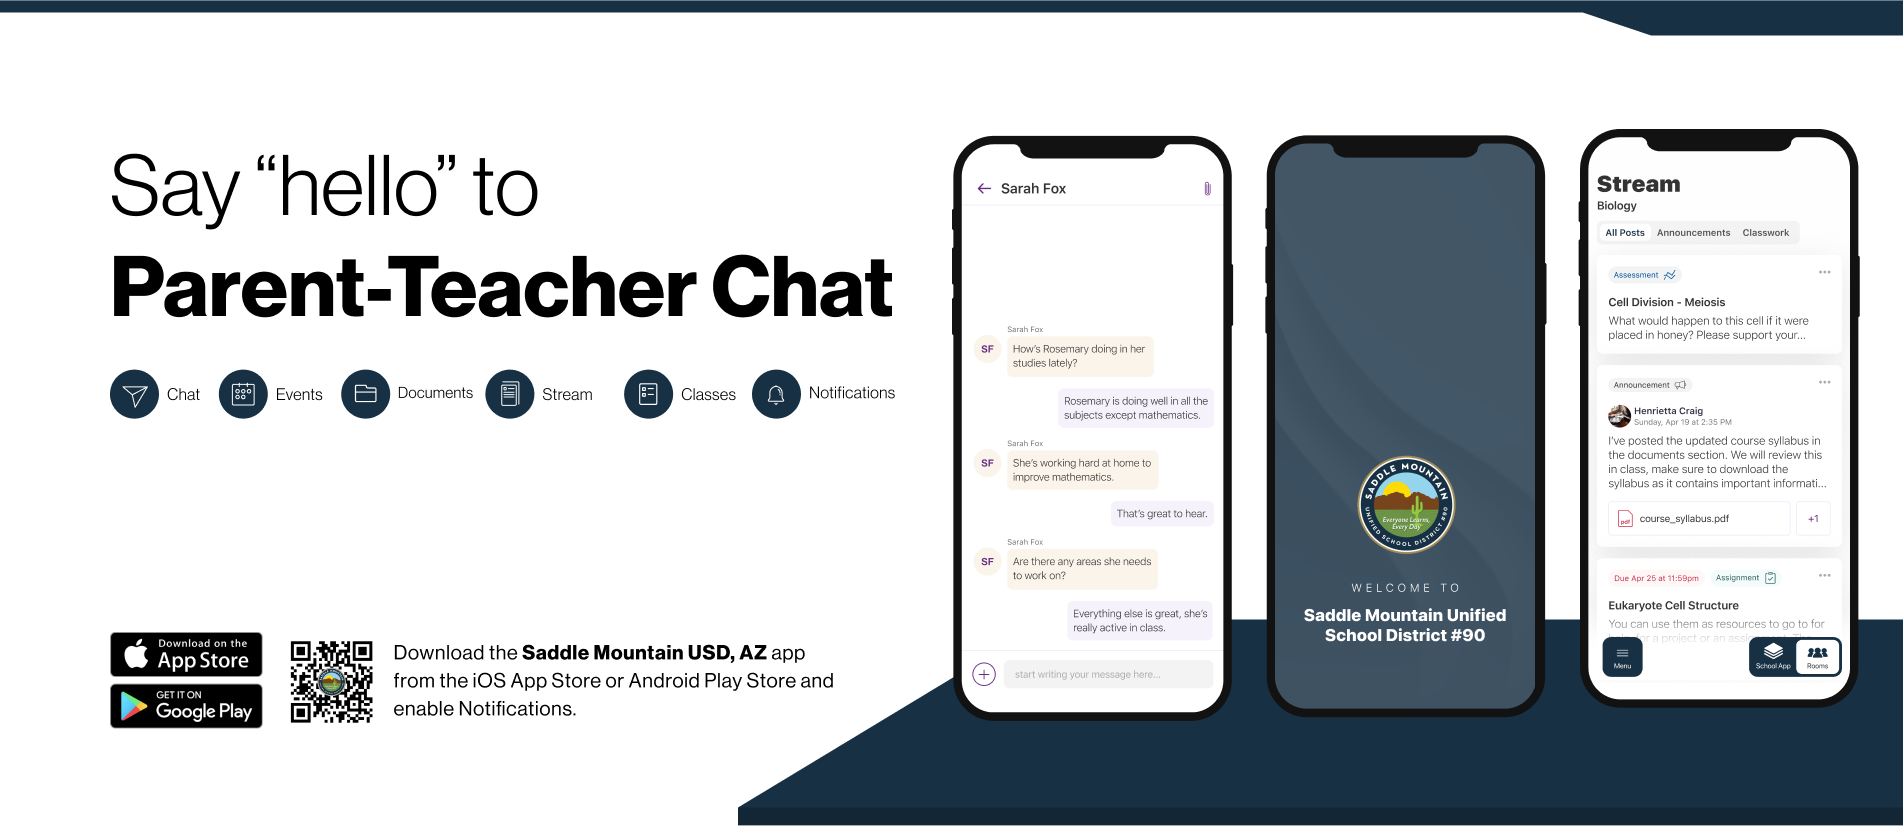 Say hello to Parent-Teacher chat in the new Rooms app. Download the Saddle Mountain Unified School District #90 app in the Google Play or Apple App store.